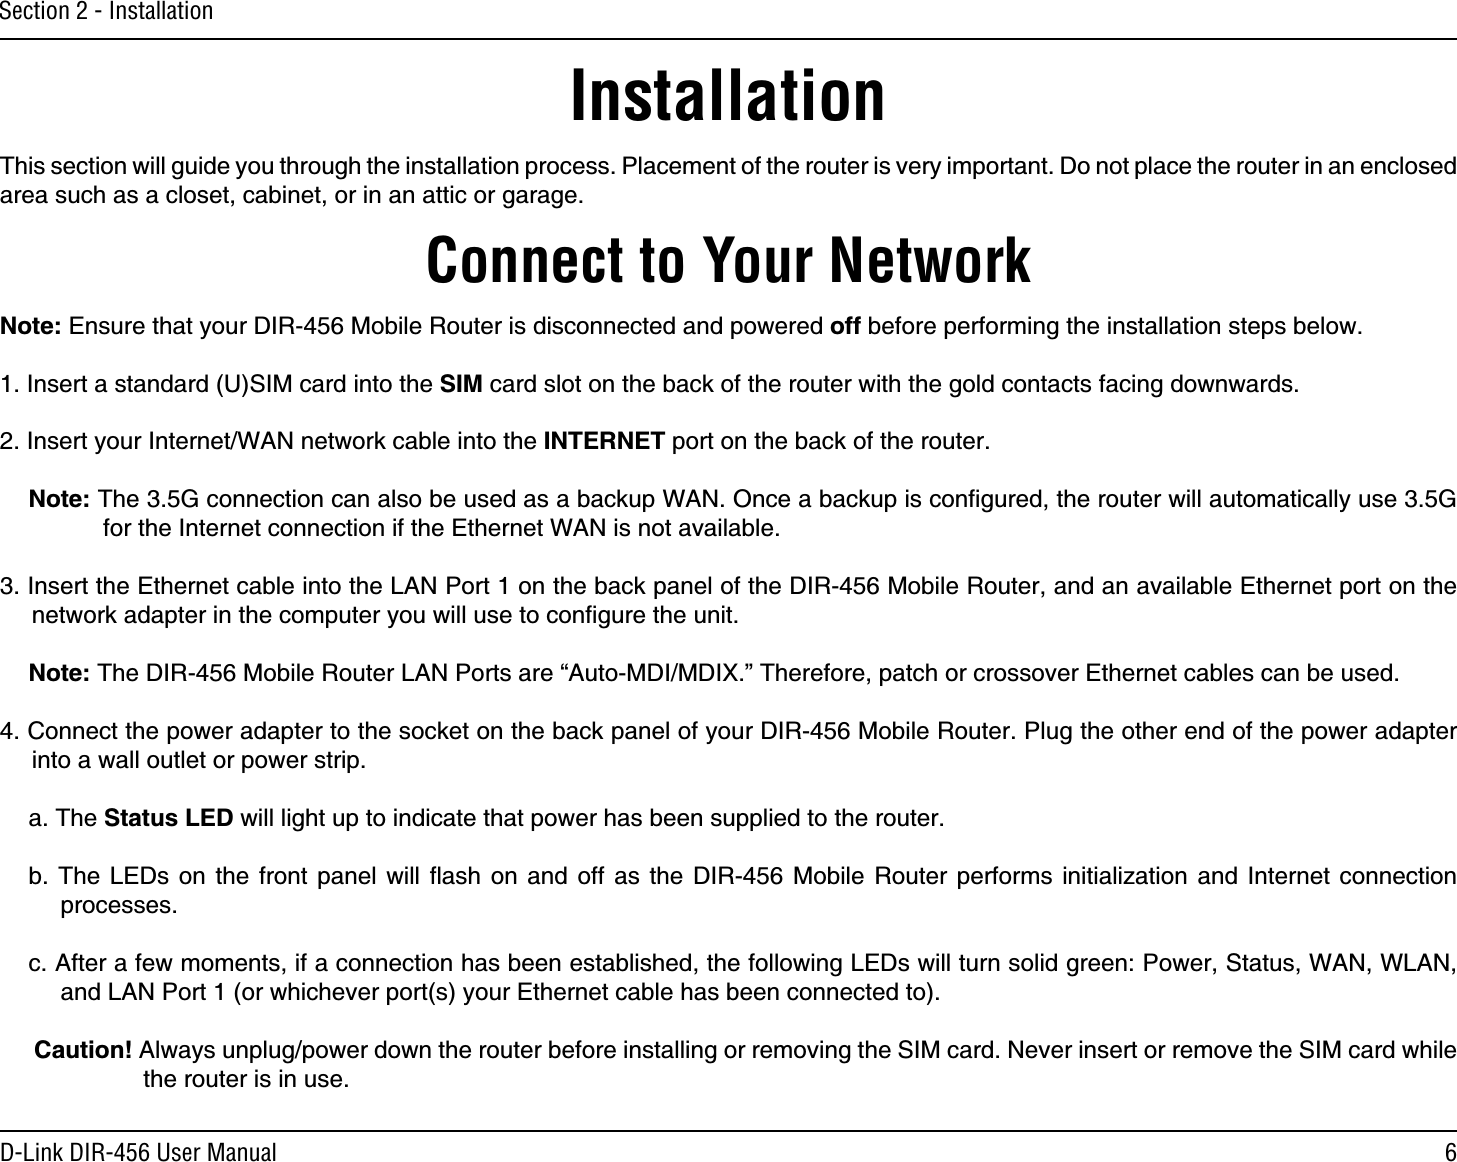 6D-Link DIR-456 User ManualSection 2 - InstallationConnect to Your NetworkInstallationThis section will guide you through the installation process. Placement of the router is very important. Do not place the router in an enclosed area such as a closet, cabinet, or in an attic or garage.Note: Ensure that your DIR-456 Mobile Router is disconnected and powered off before performing the installation steps below.1. Insert a standard (U)SIM card into the SIM card slot on the back of the router with the gold contacts facing downwards.2. Insert your Internet/WAN network cable into the INTERNET port on the back of the router.Note: The 3.5G connection can also be used as a backup WAN. Once a backup is conﬁgured, the router will automatically use 3.5G for the Internet connection if the Ethernet WAN is not available.3. Insert the Ethernet cable into the LAN Port 1 on the back panel of the DIR-456 Mobile Router, and an available Ethernet port on the network adapter in the computer you will use to conﬁgure the unit.Note: The DIR-456 Mobile Router LAN Ports are “Auto-MDI/MDIX.” Therefore, patch or crossover Ethernet cables can be used.4. Connect the power adapter to the socket on the back panel of your DIR-456 Mobile Router. Plug the other end of the power adapter into a wall outlet or power strip.a. The Status LED will light up to indicate that power has been supplied to the router.b. The LEDs on the front panel will ﬂash on and off as the DIR-456 Mobile Router performs initialization and Internet connection processes.c. After a few moments, if a connection has been established, the following LEDs will turn solid green: Power, Status, WAN, WLAN, and LAN Port 1 (or whichever port(s) your Ethernet cable has been connected to).Caution! Always unplug/power down the router before installing or removing the SIM card. Never insert or remove the SIM card while the router is in use.